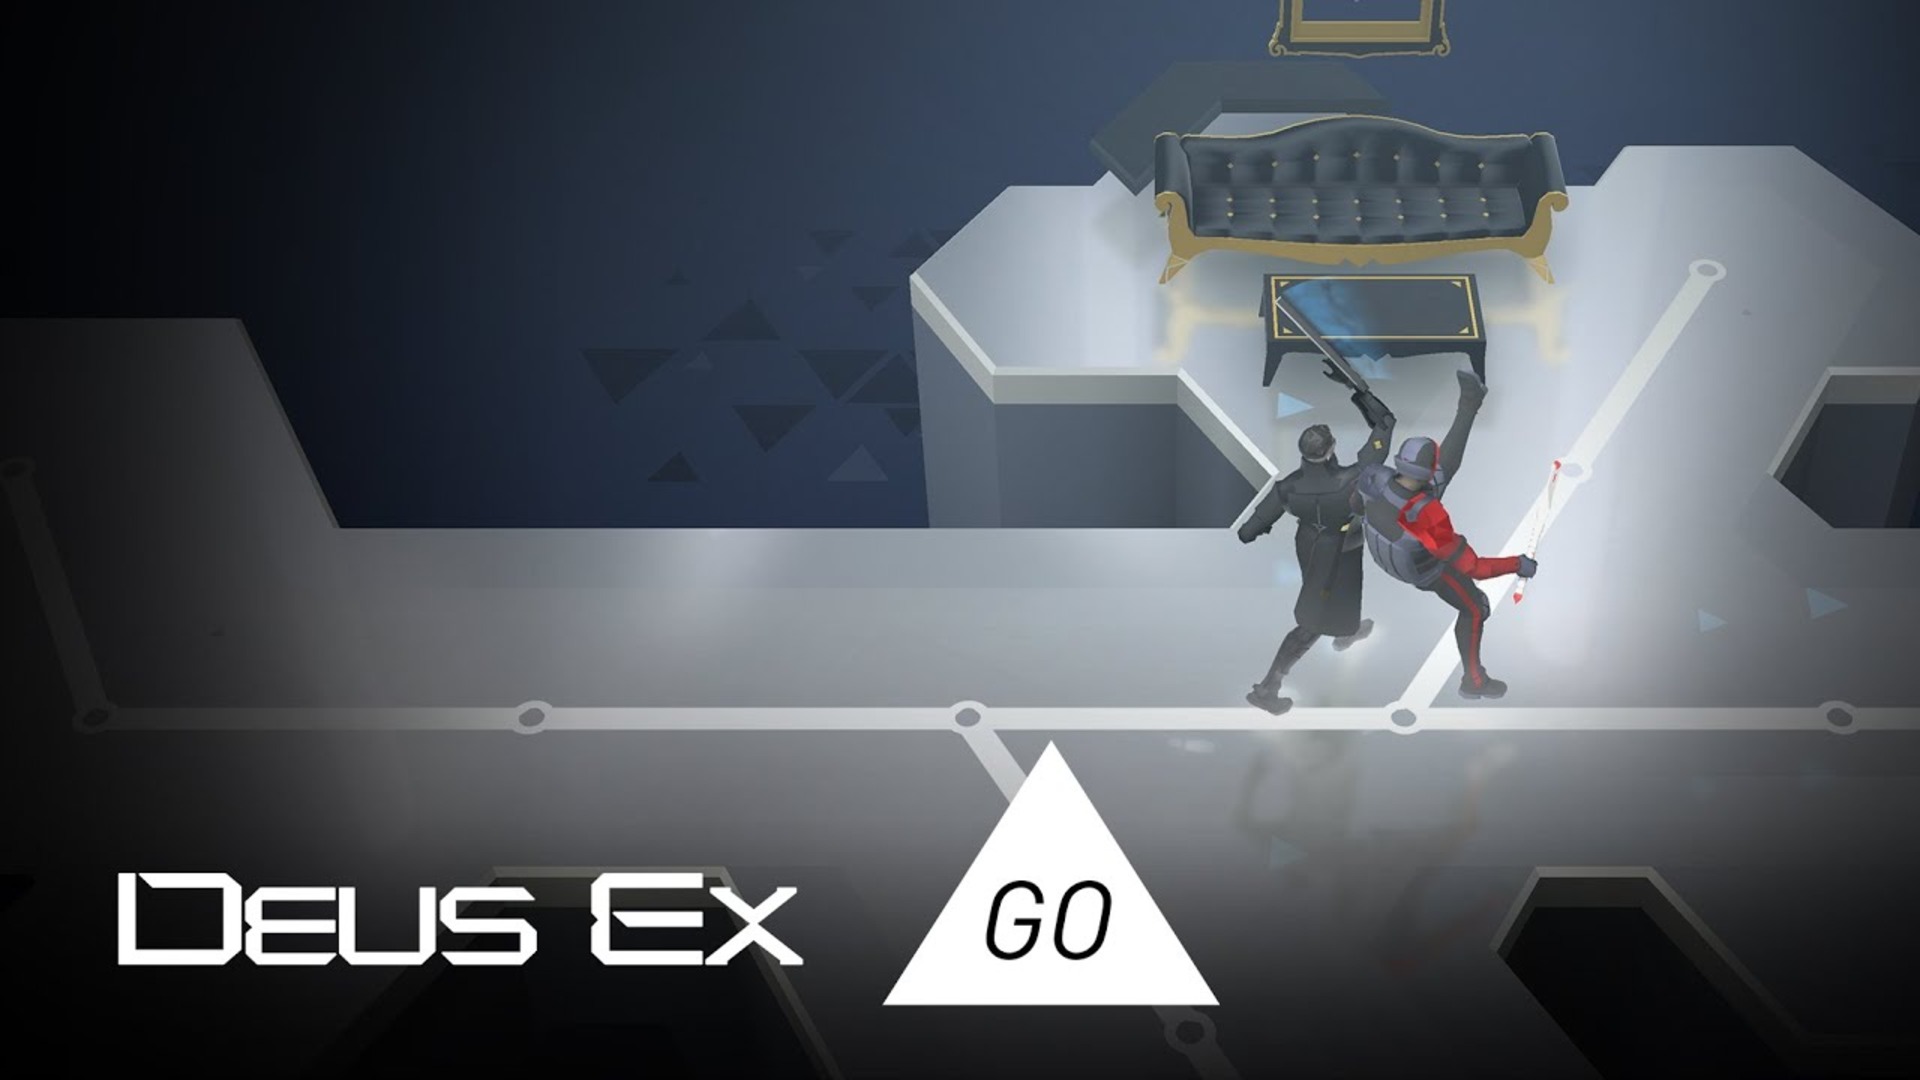 Former Square Enix Montreal games including Deus Ex Go and Hitman Sniper are shutting down